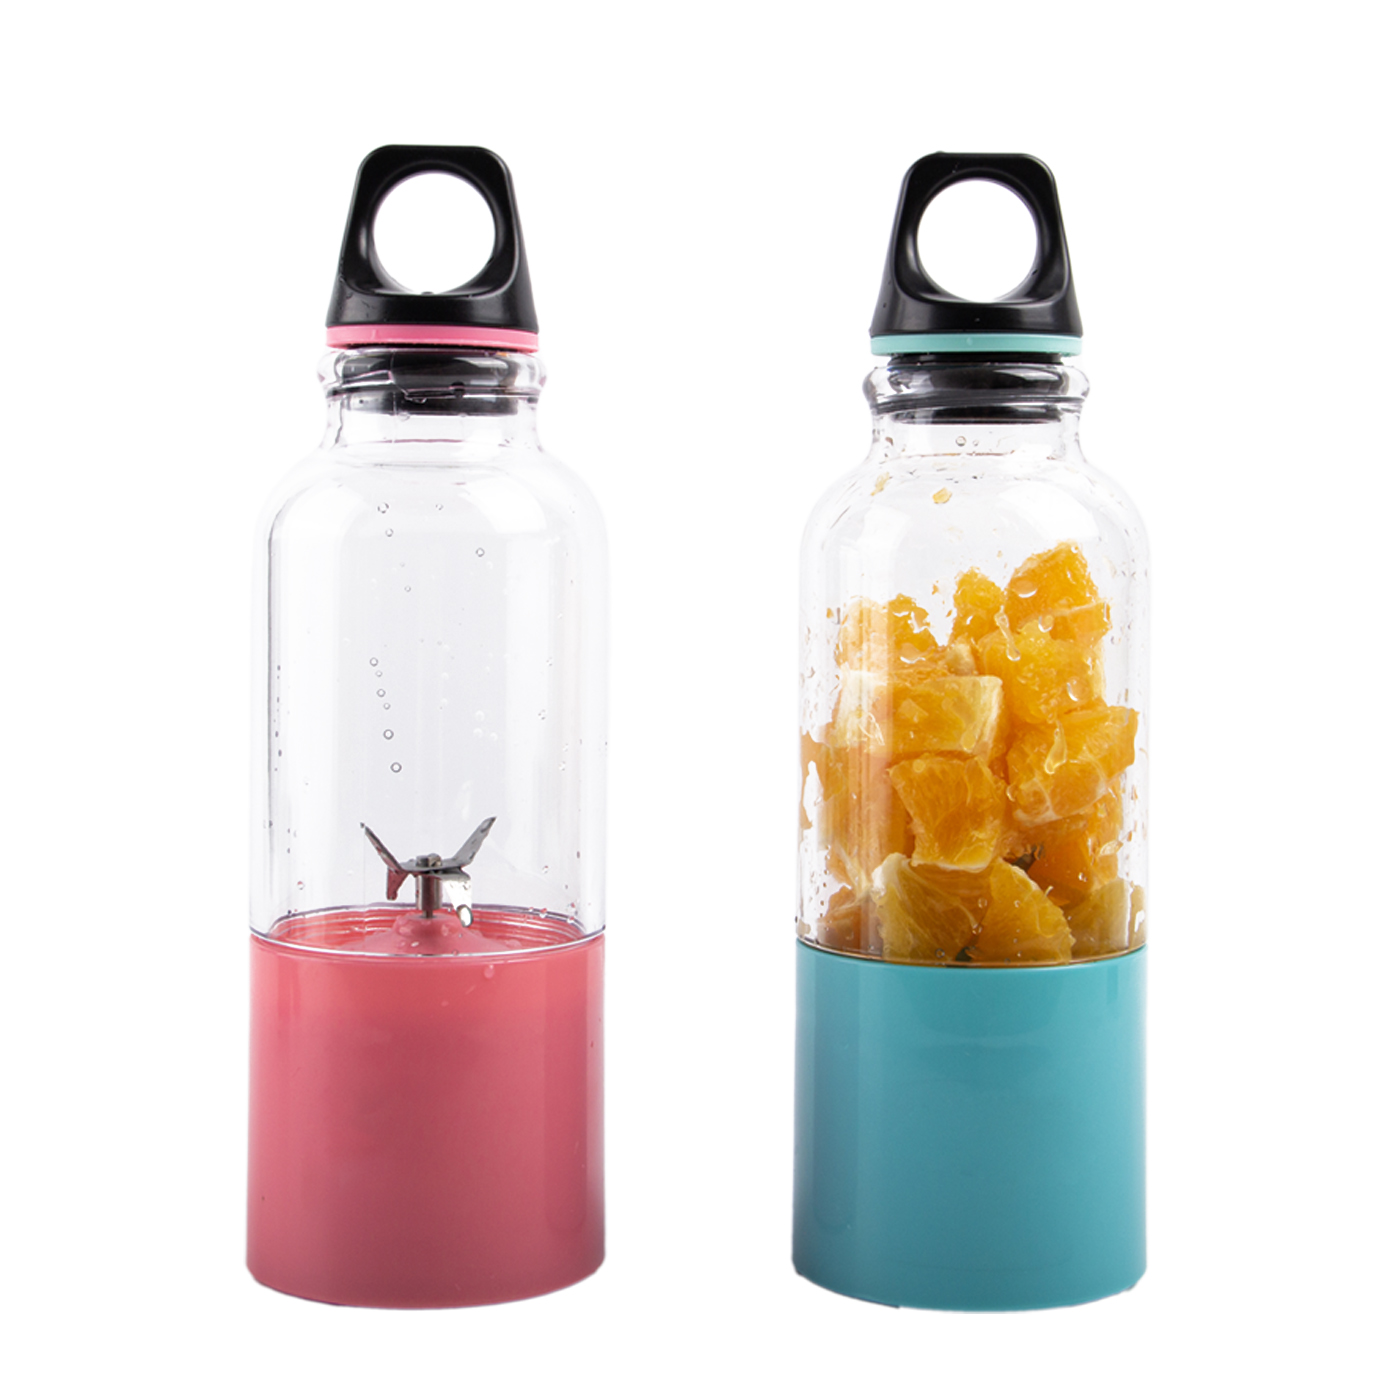 Portable USB Juicer Cup1